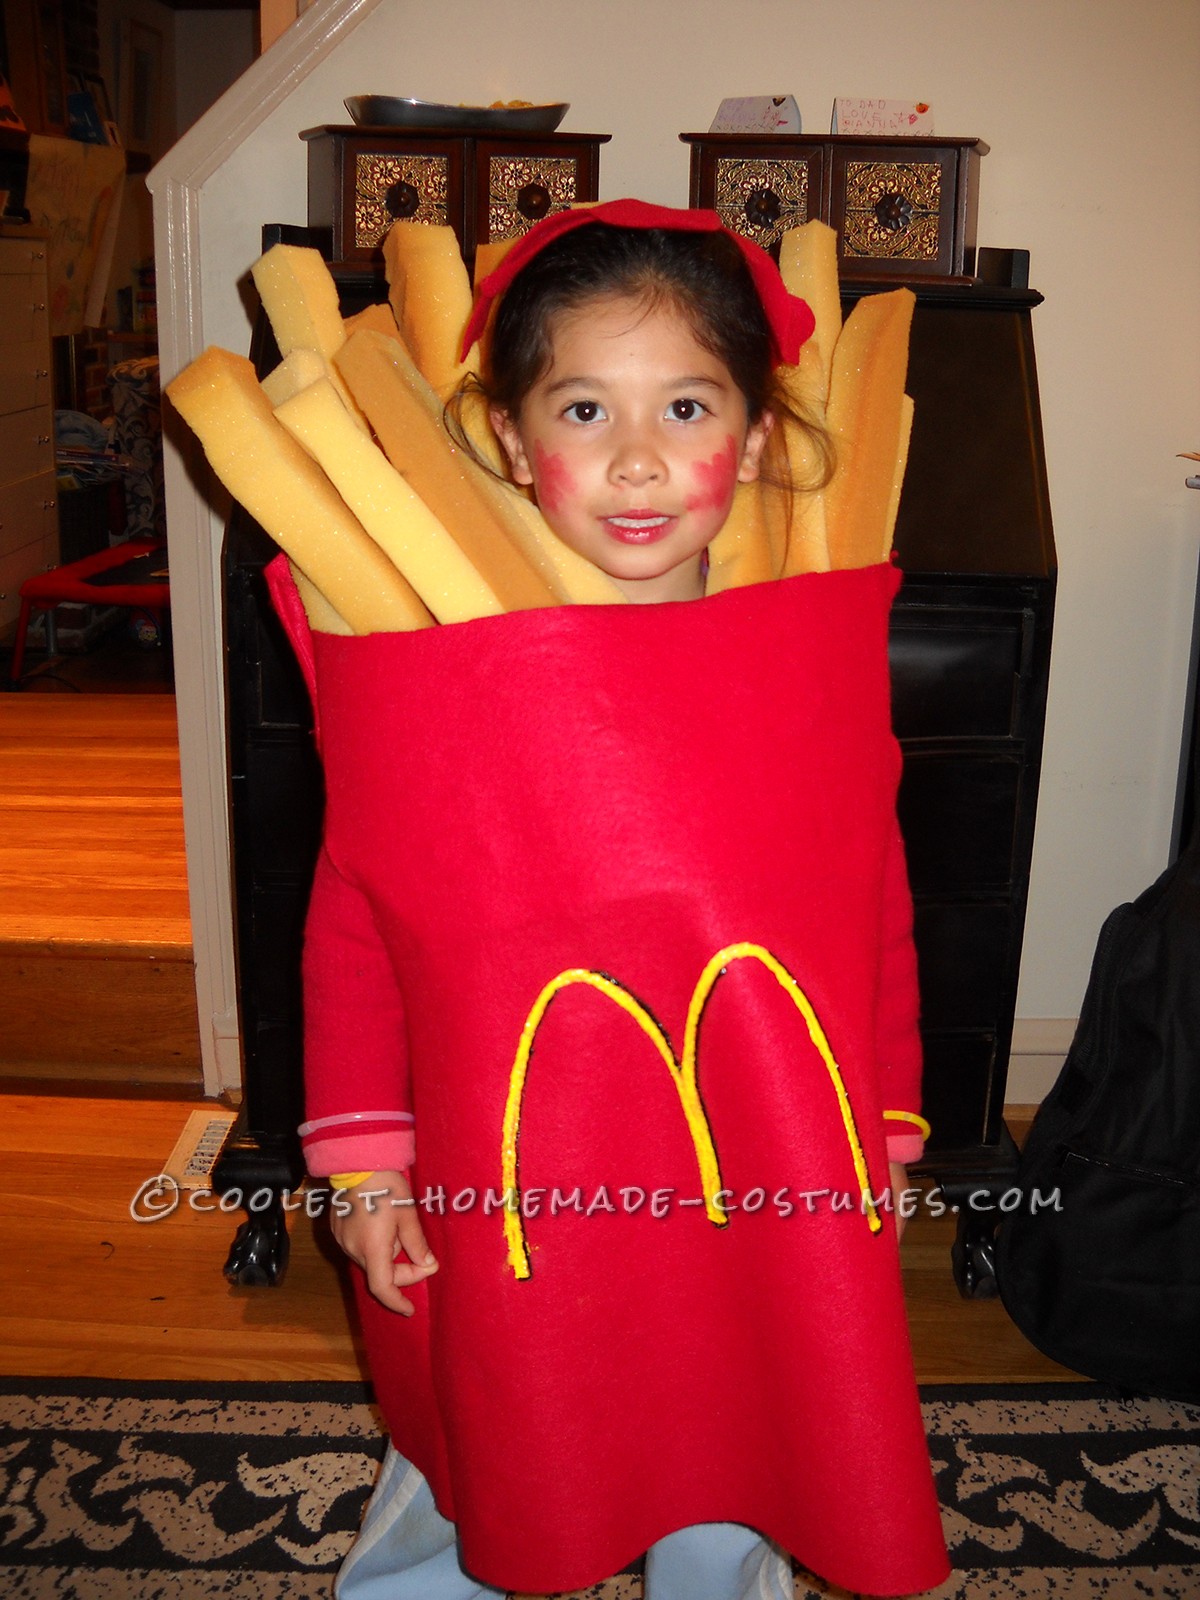 Cool Halloween Costume for a Child: Large Order of McDonald's French Fries